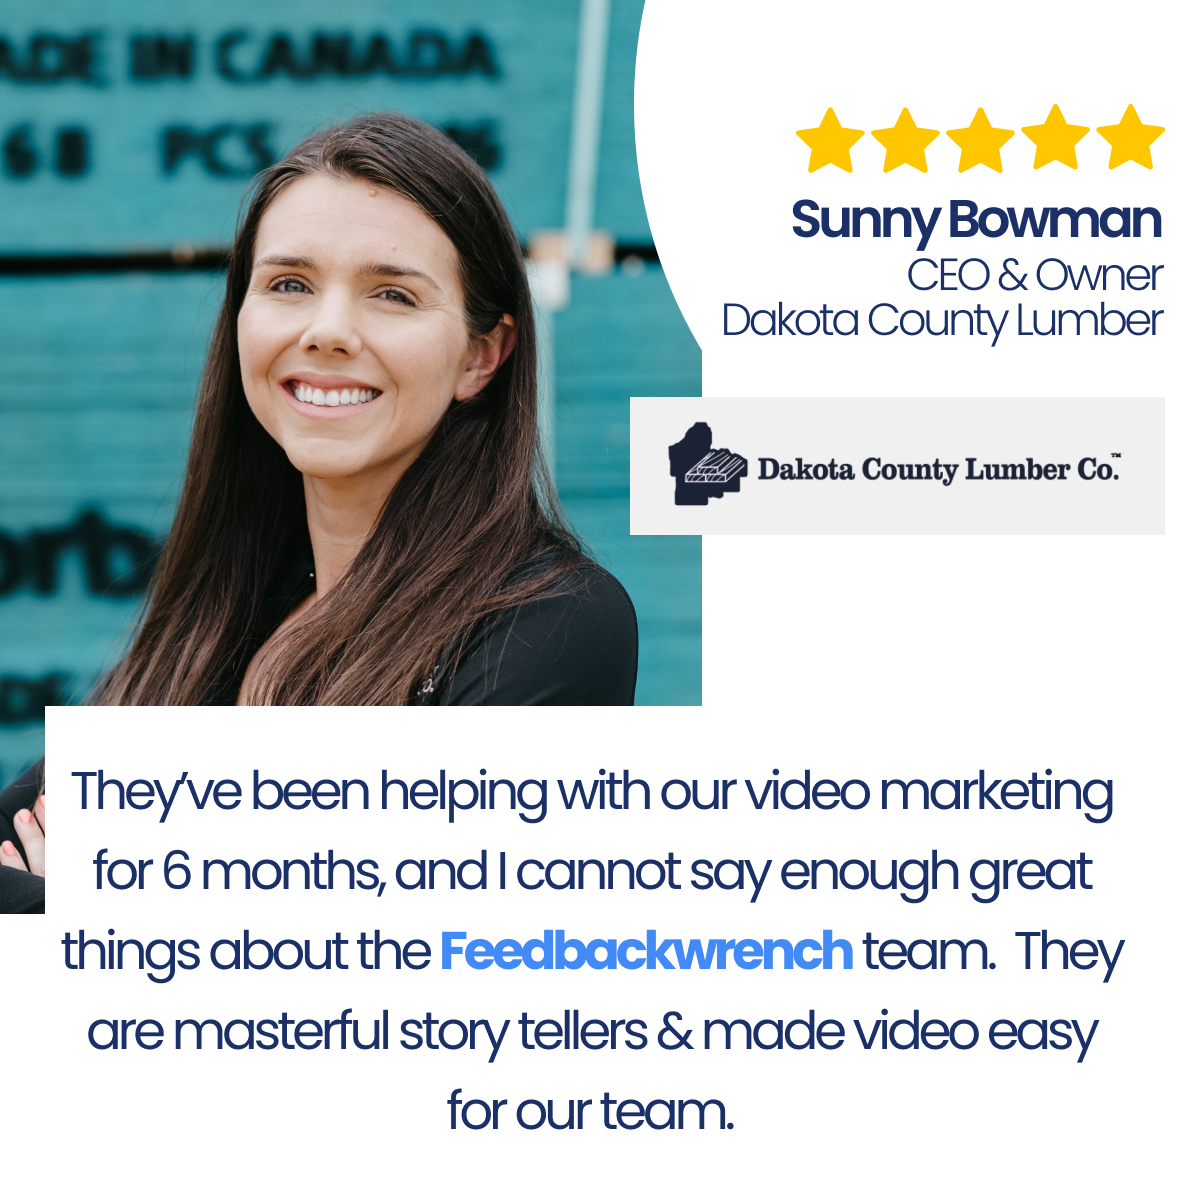 Heres what Sunny Bowman, CEO of Dakota Lumber had to say about working with Feedbackwrench for video!  #mn #minnesota #paradeofhomes #customhomebuilder #paradeofhomes #paradeofhomesshowcase #artisanhometour #luxuryhometourmn #paradeofhomesmn